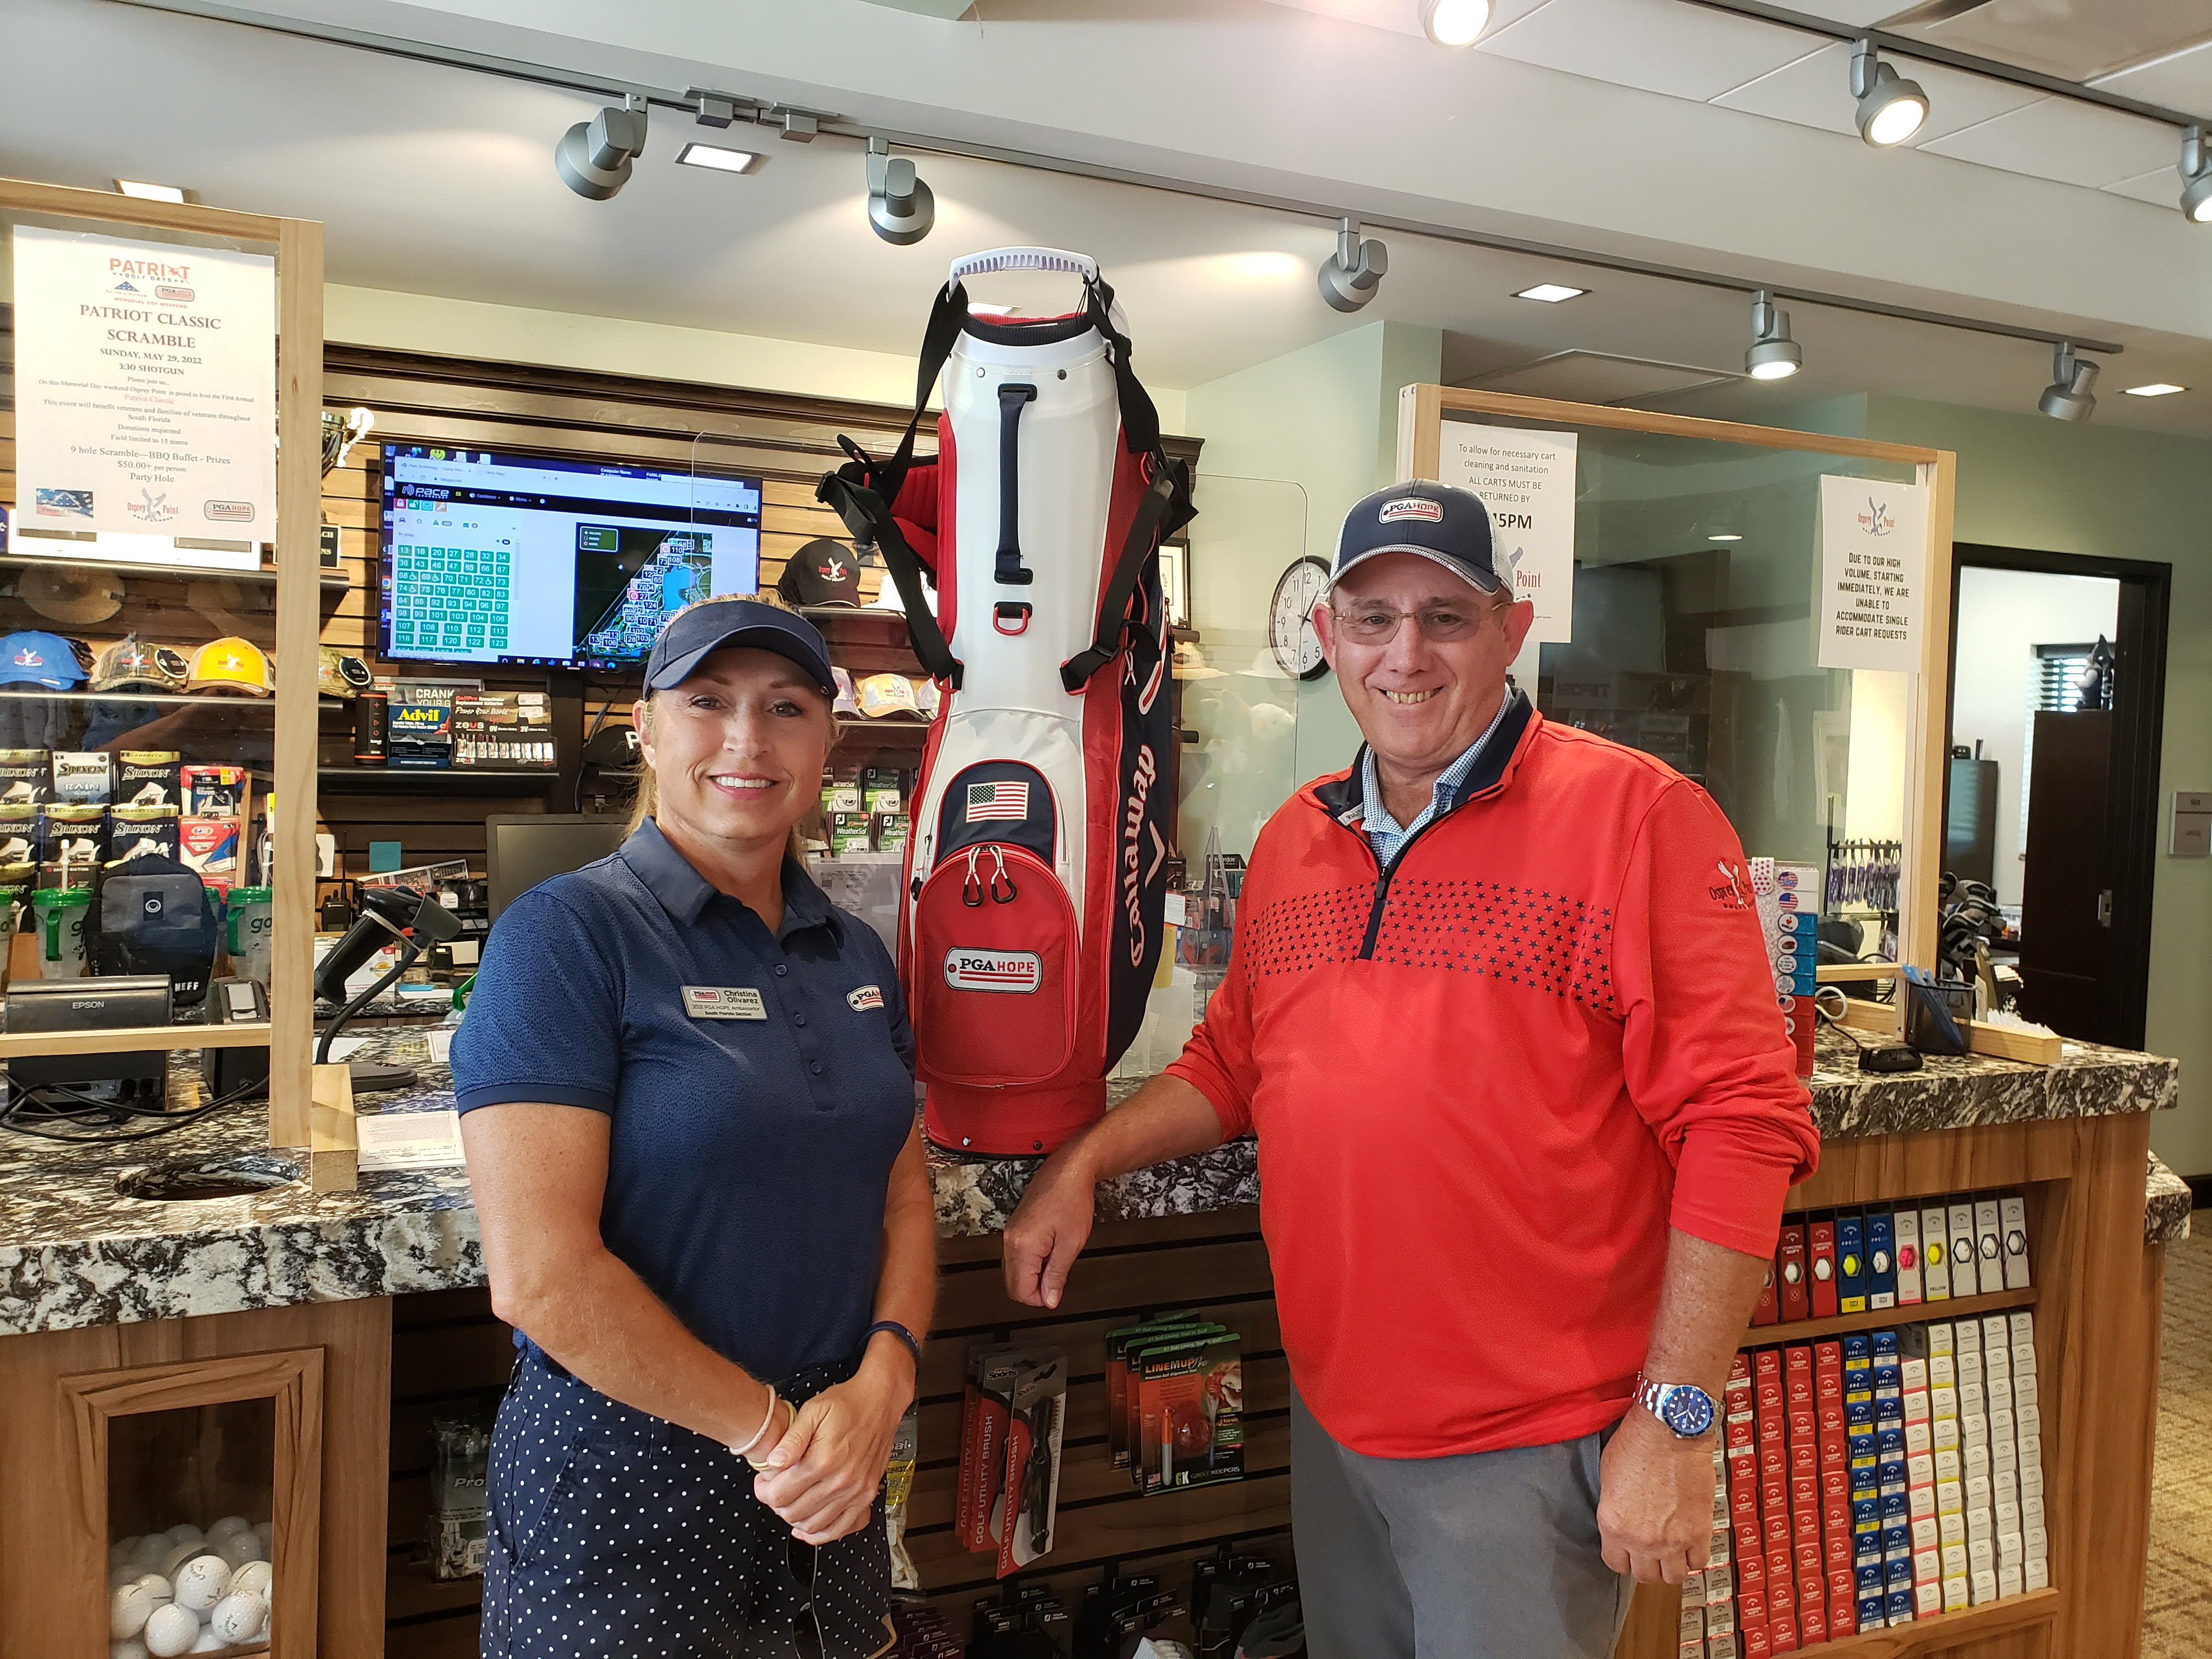 Christina Olivarez poses with Bo Preston, the general manager at Osprey Point Golf Club in Boca Raton. Preston was named the 2021 Patriot Award recipient for the South Florida Section.